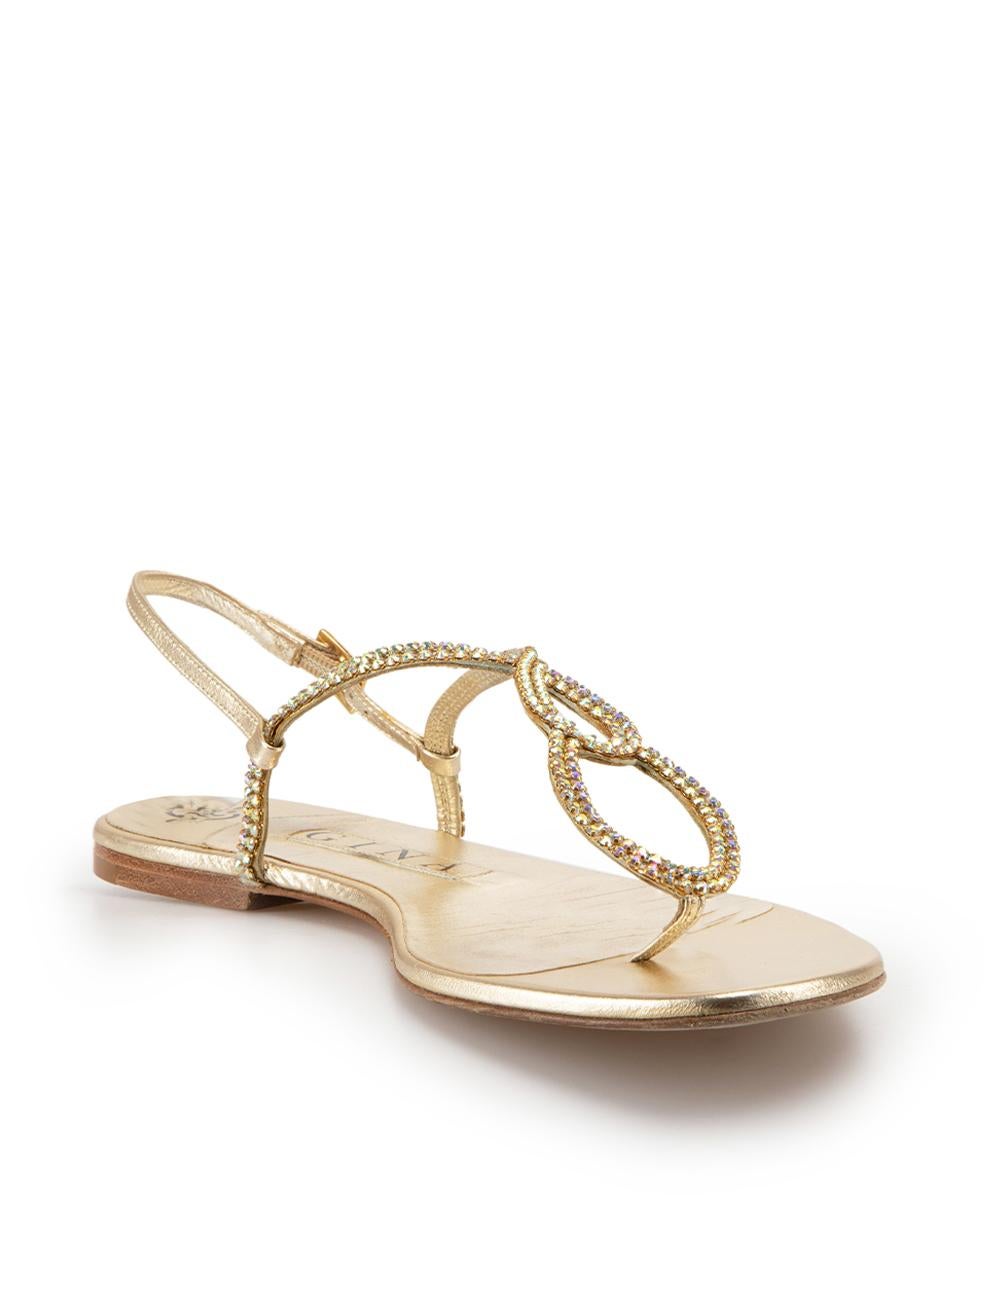 CONDITION is Good. Minor wear to sandals is evident. Light creasing to inner sole on this used Gina designer resale item. Dustbag included.



Details


Gold 

Leather

Flat thong sandals

Crystal embellished

Adjustable ankle